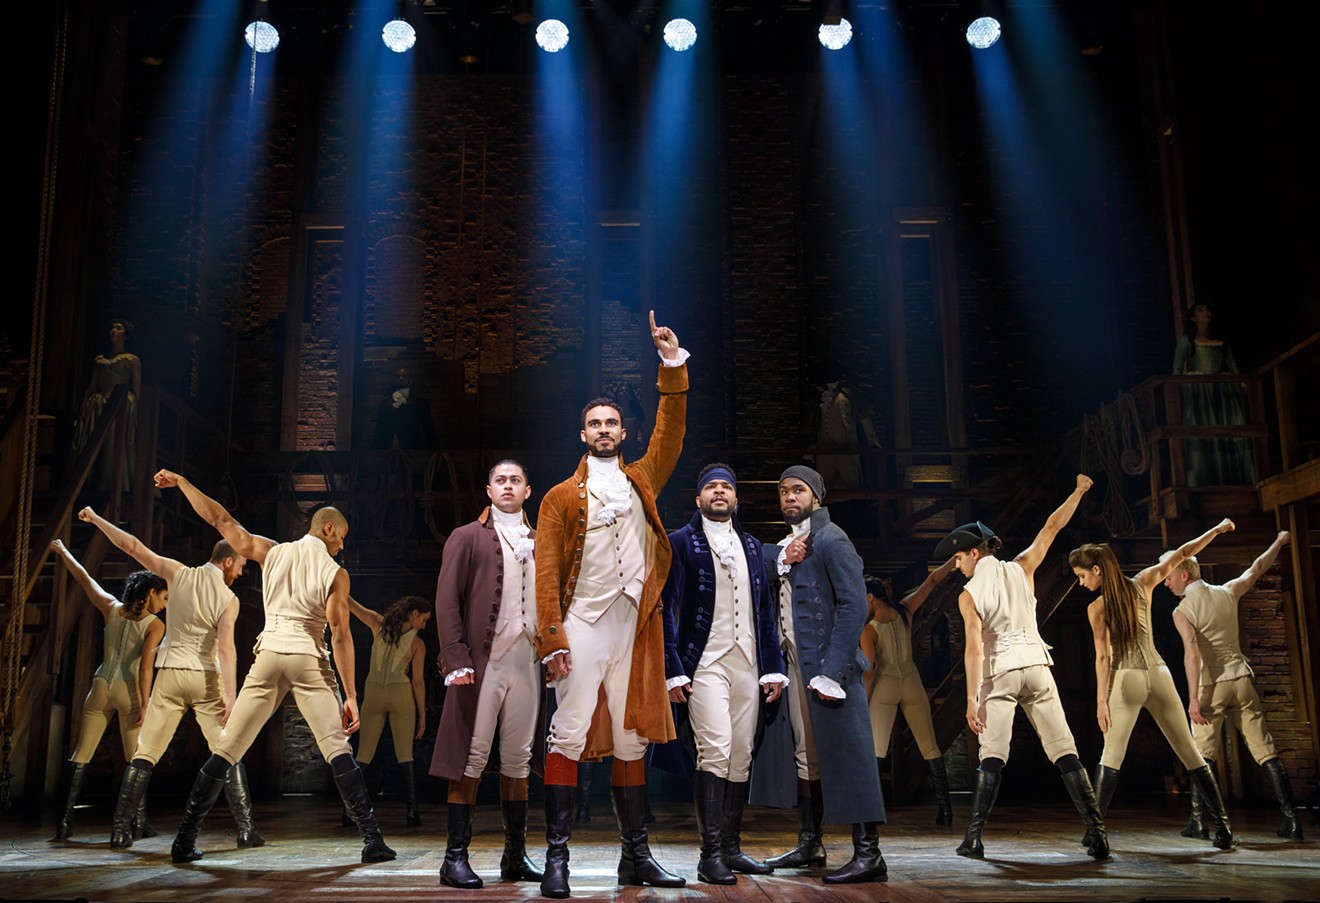 The national tour of Hamilton will begin a four-week run at the Arsht Center in February.